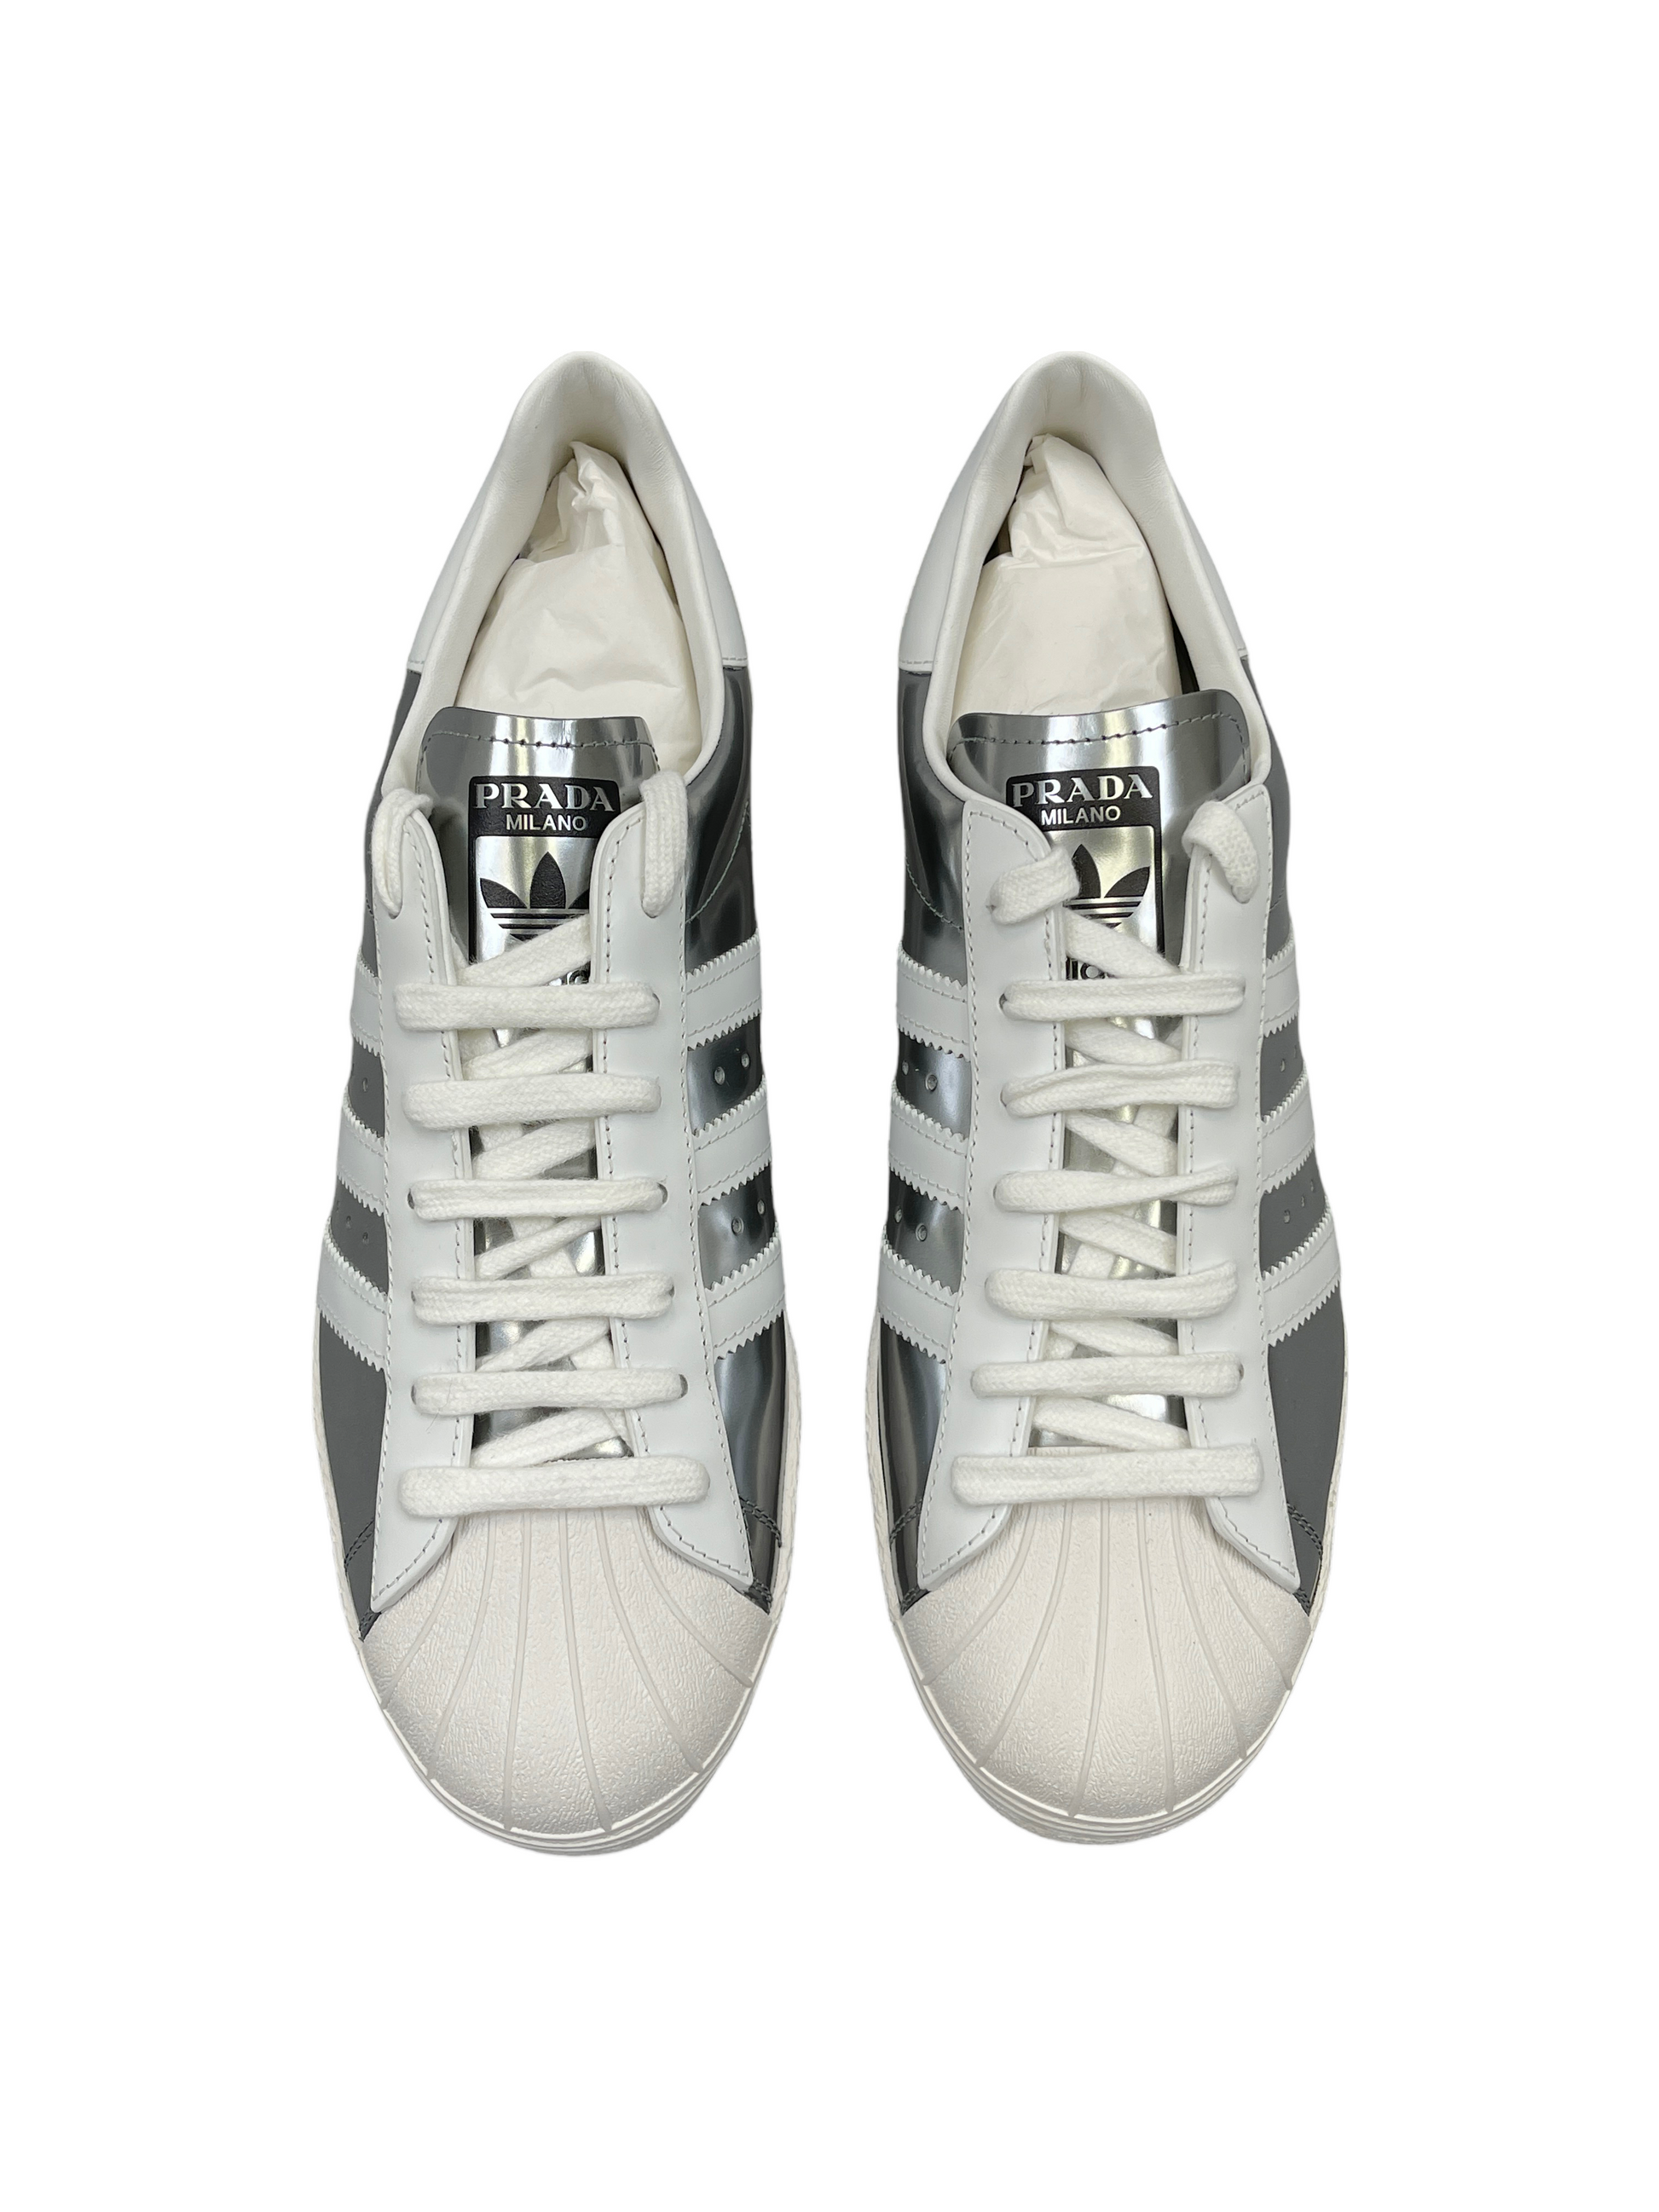 Adidas x Prada Superstar Silver 9.5 US - Genuine Design Luxury Consignment for Men. New & Pre-Owned Clothing, Shoes, & Accessories. Calgary, Canada